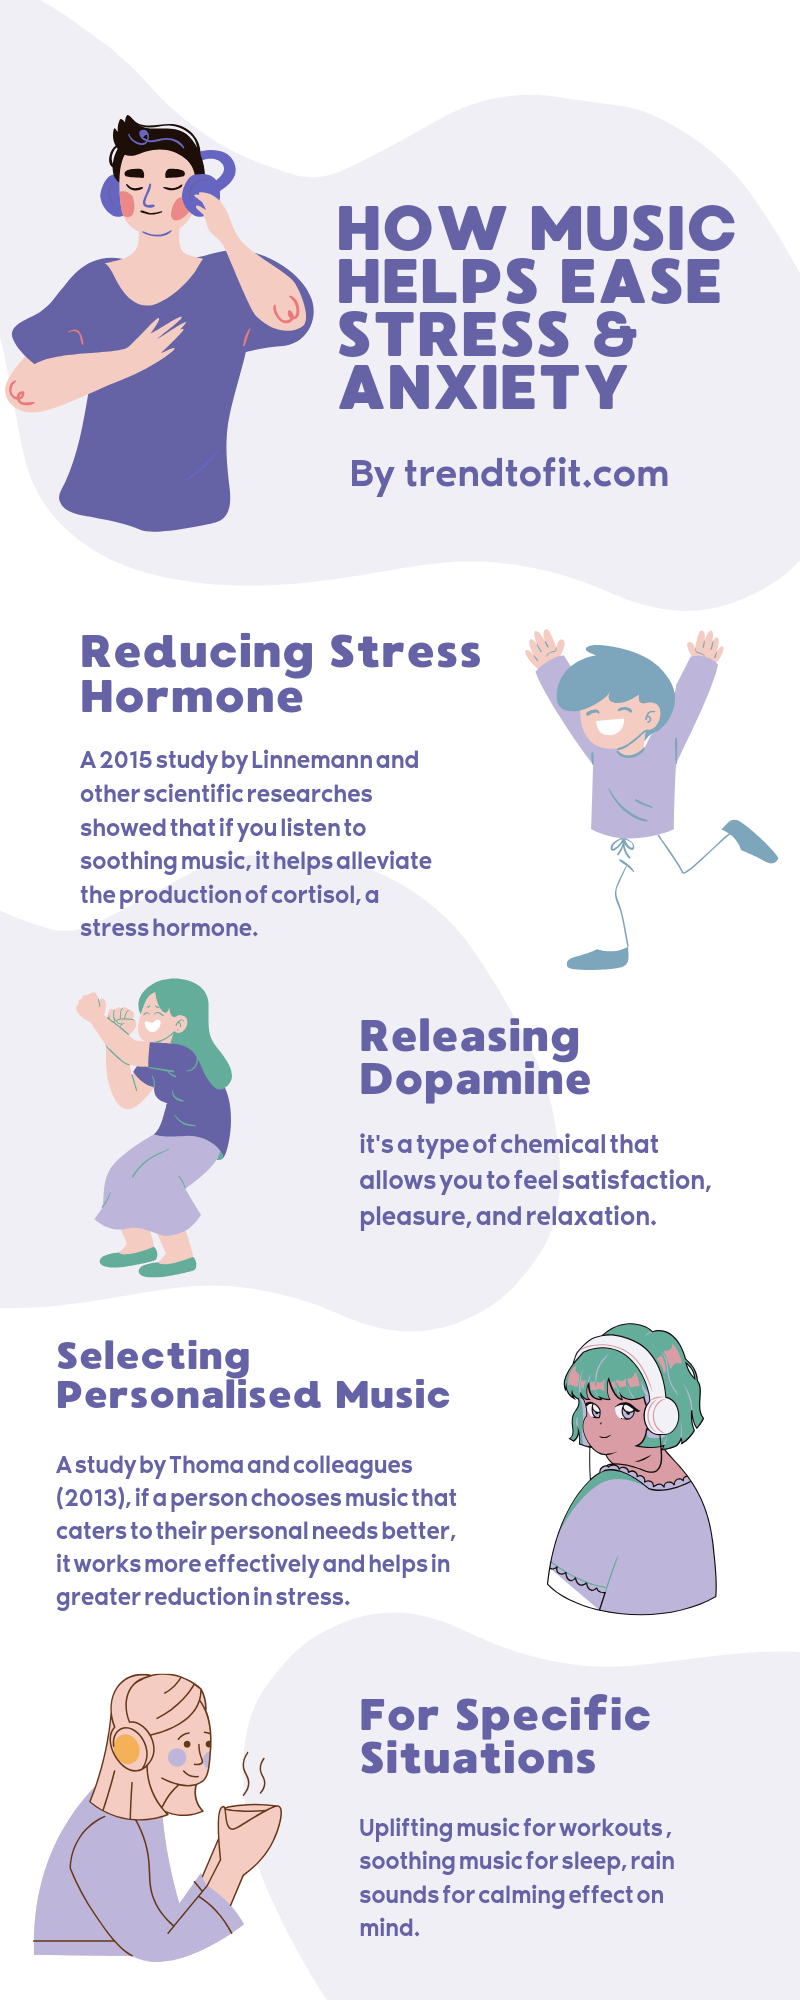 benefits of music to reduce anxiety, stress and improve mental health